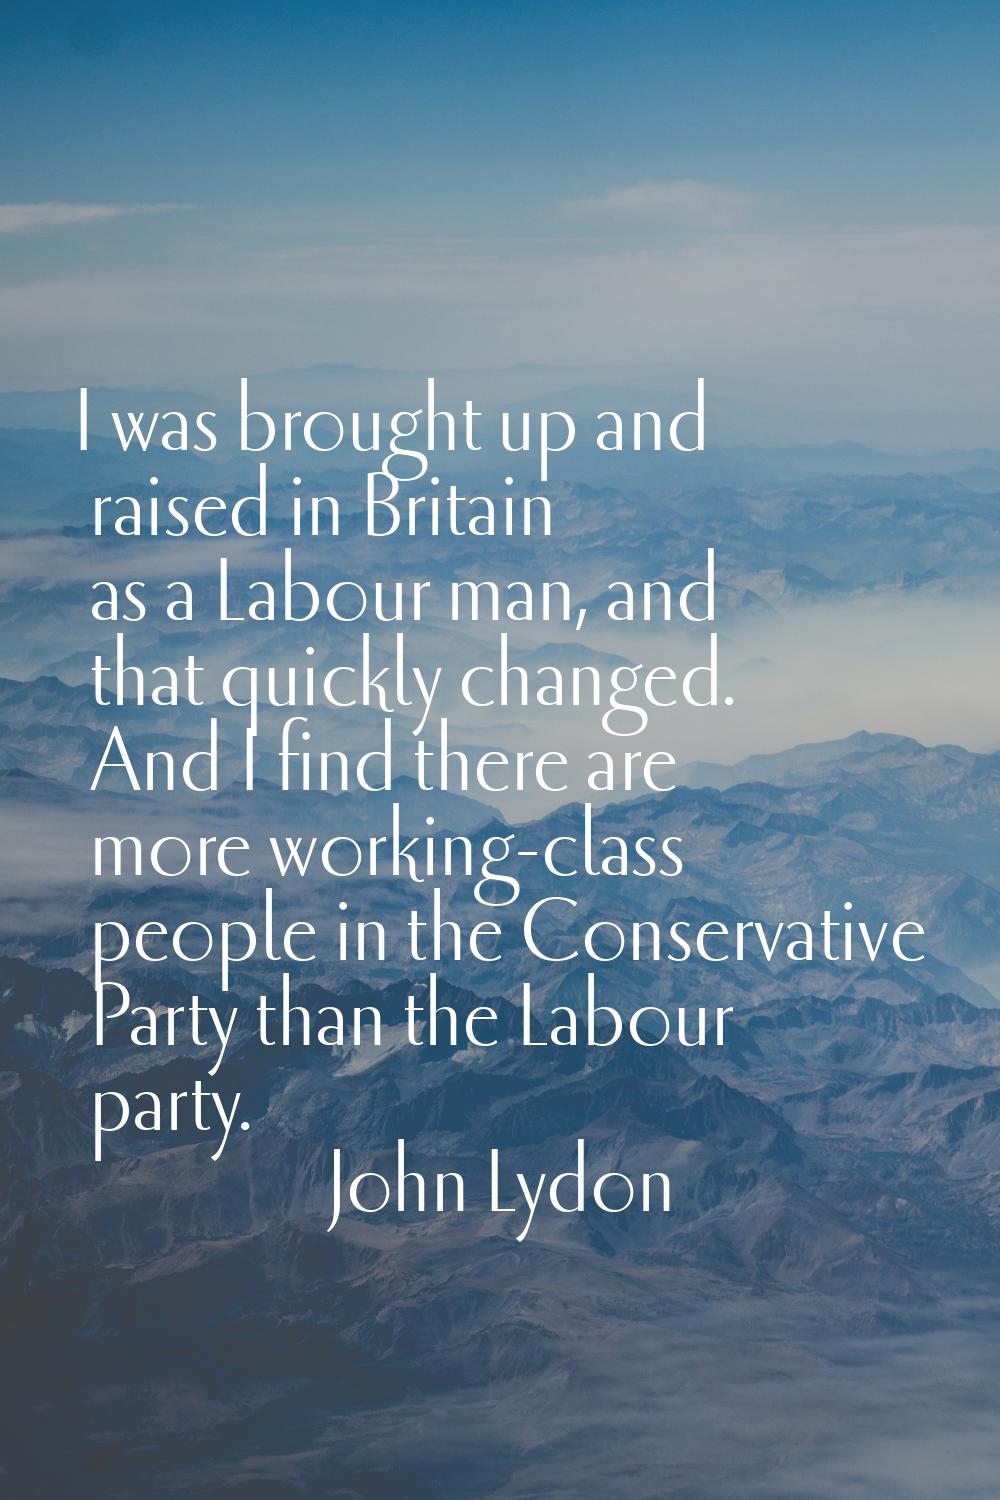 I was brought up and raised in Britain as a Labour man, and that quickly changed. And I find there 